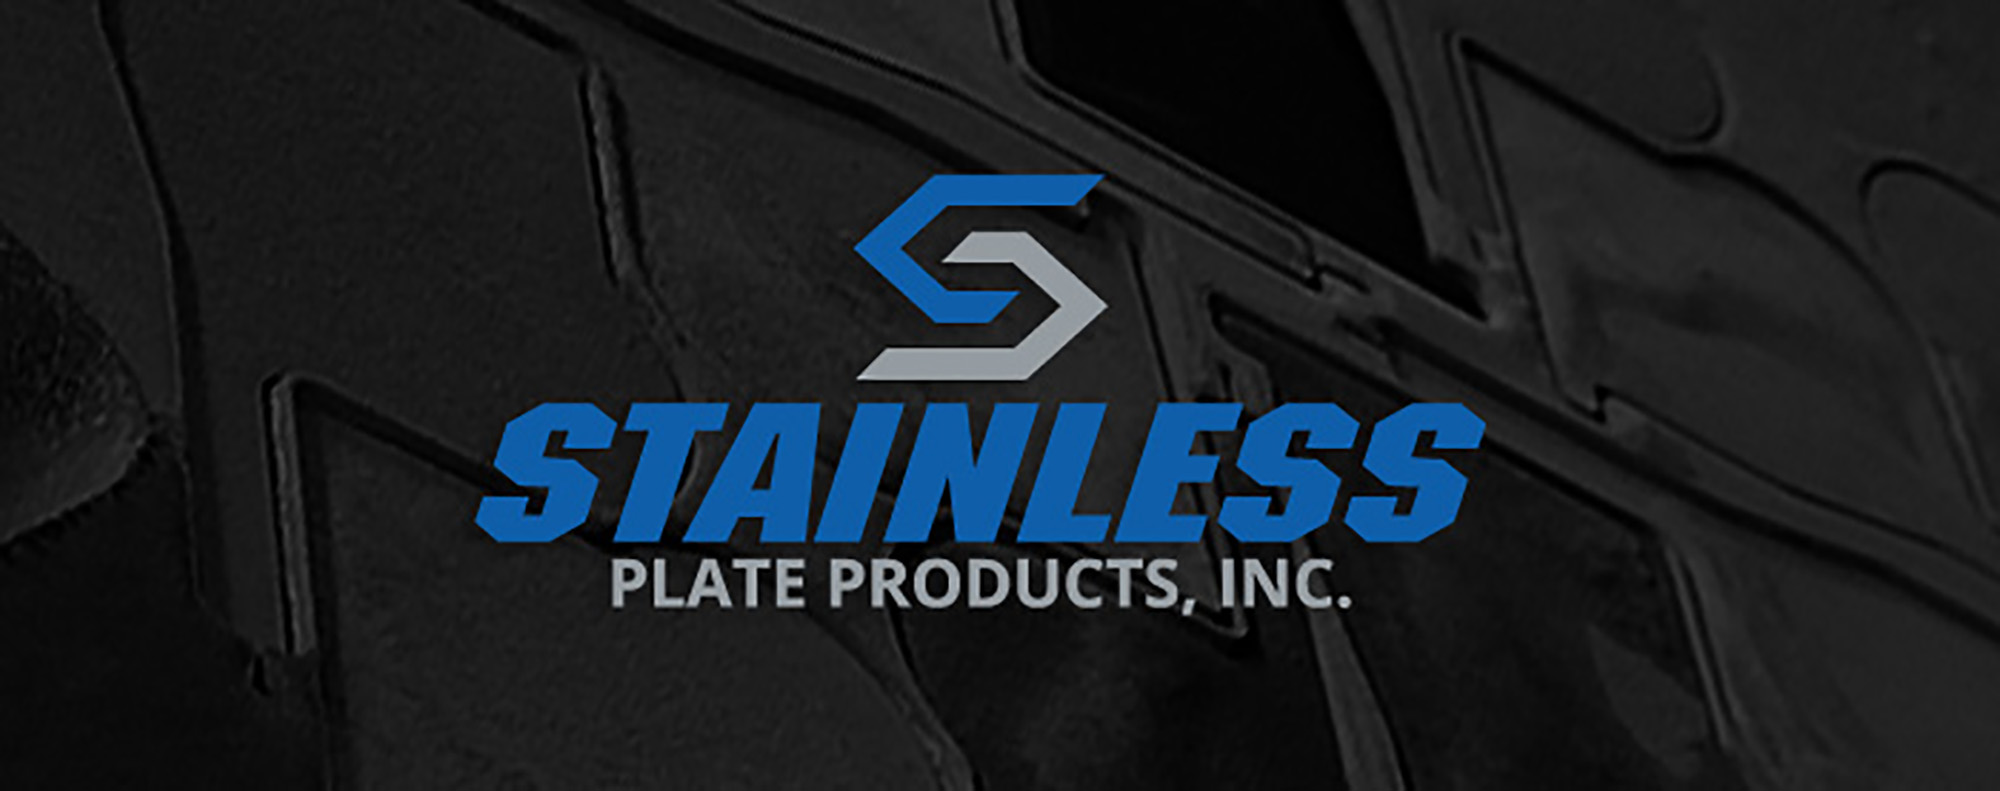 Stainless Plate Products